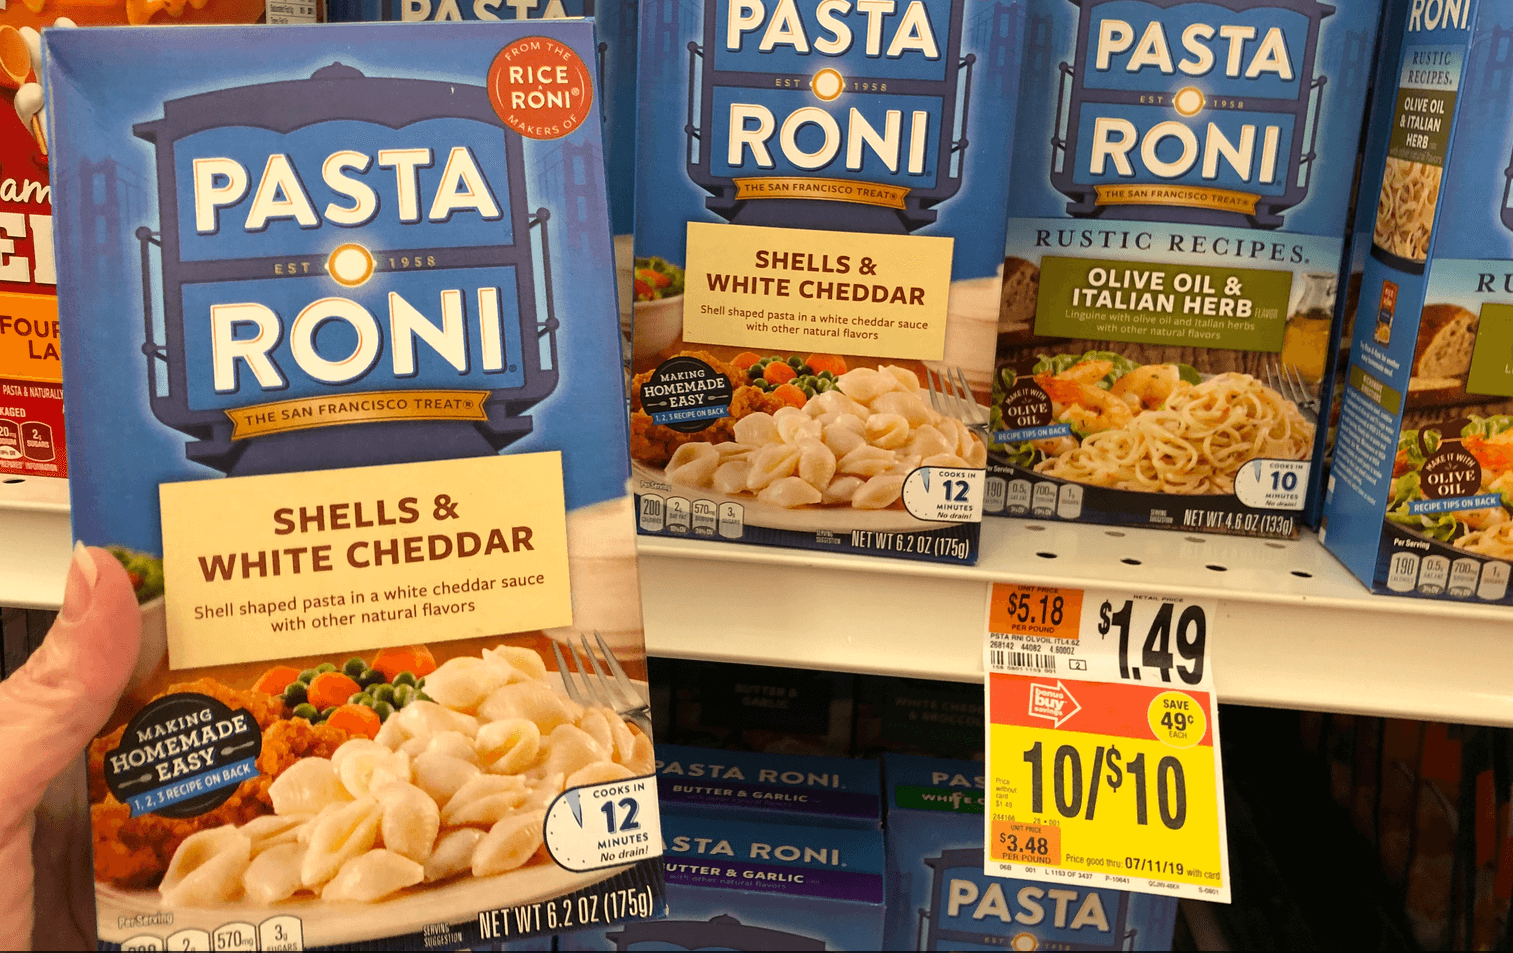 rice-or-pasta-roni-only-0-75-at-stop-shop-living-rich-with-coupons